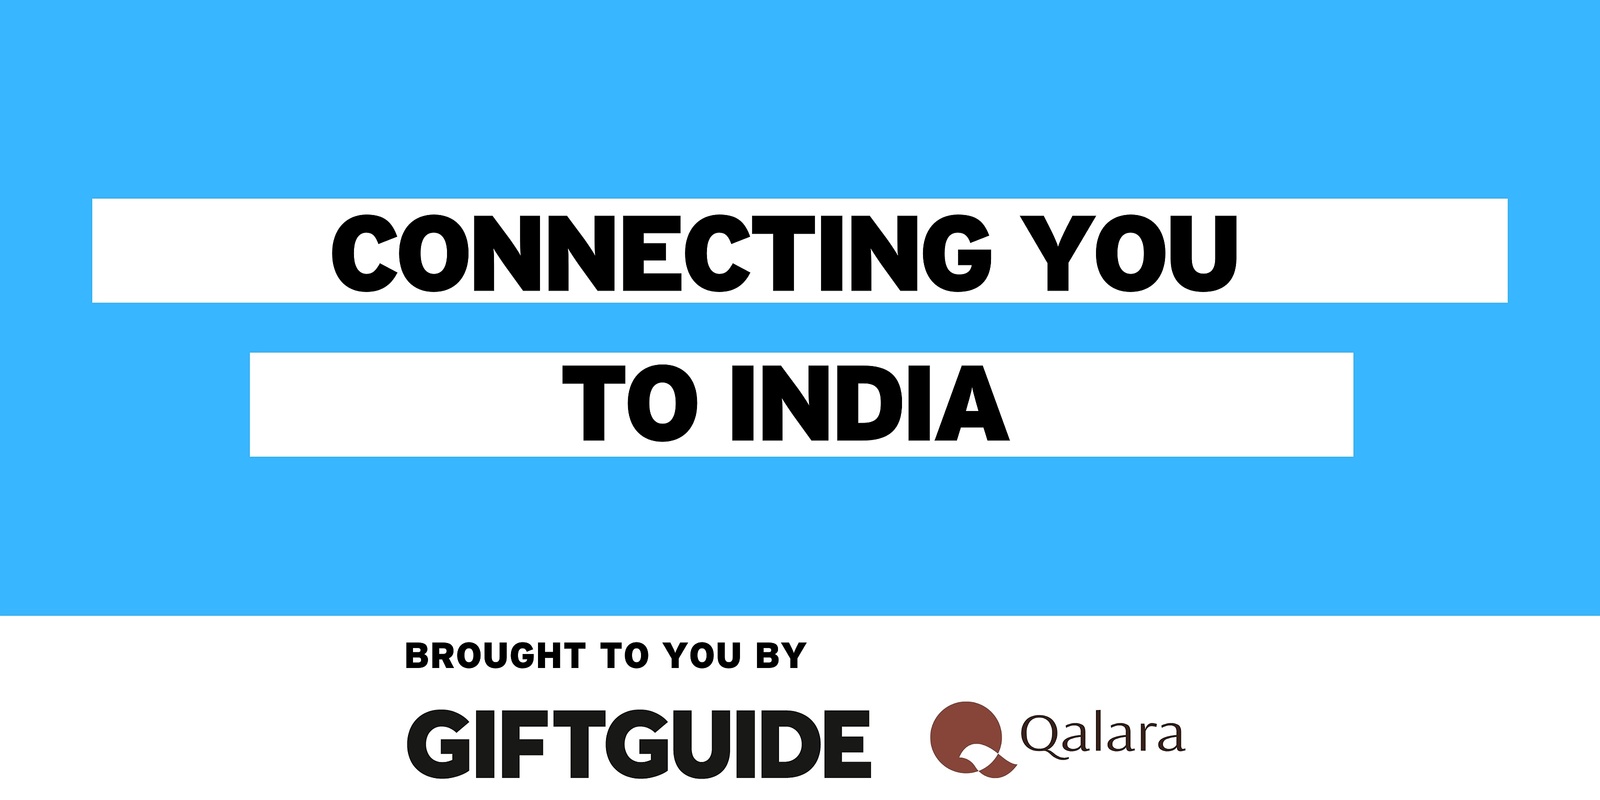 Banner image for Connecting you to India brought to you by Qalara and Giftguide